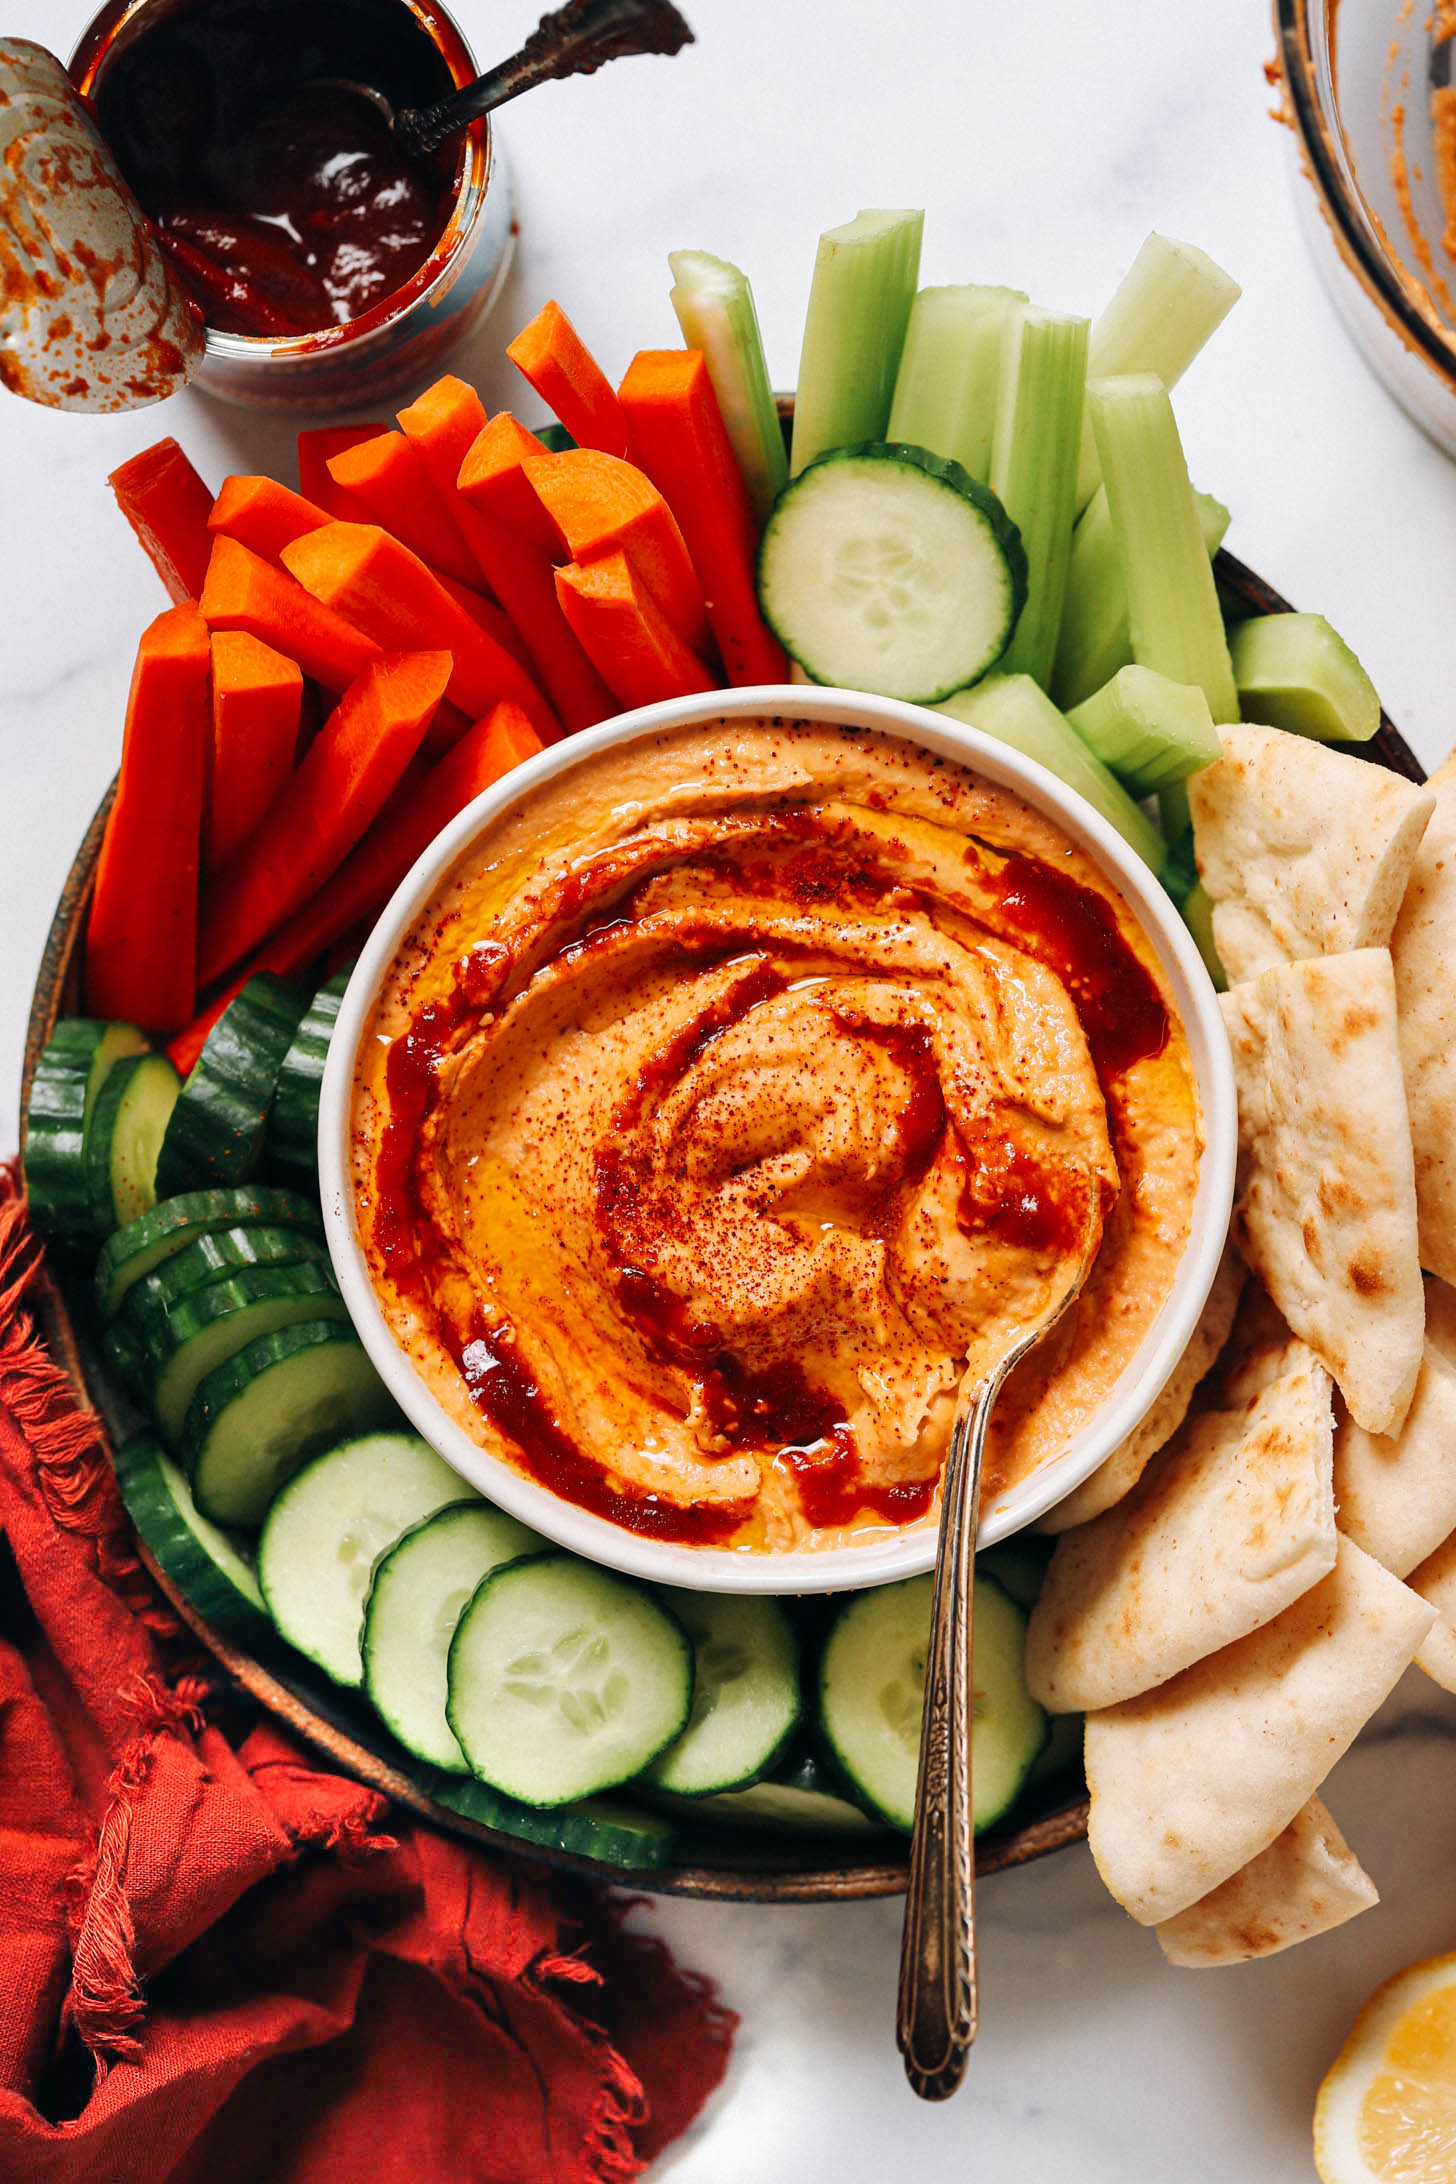 Bowl of spicy chipotle hummus surrounded by veggies and pita bread